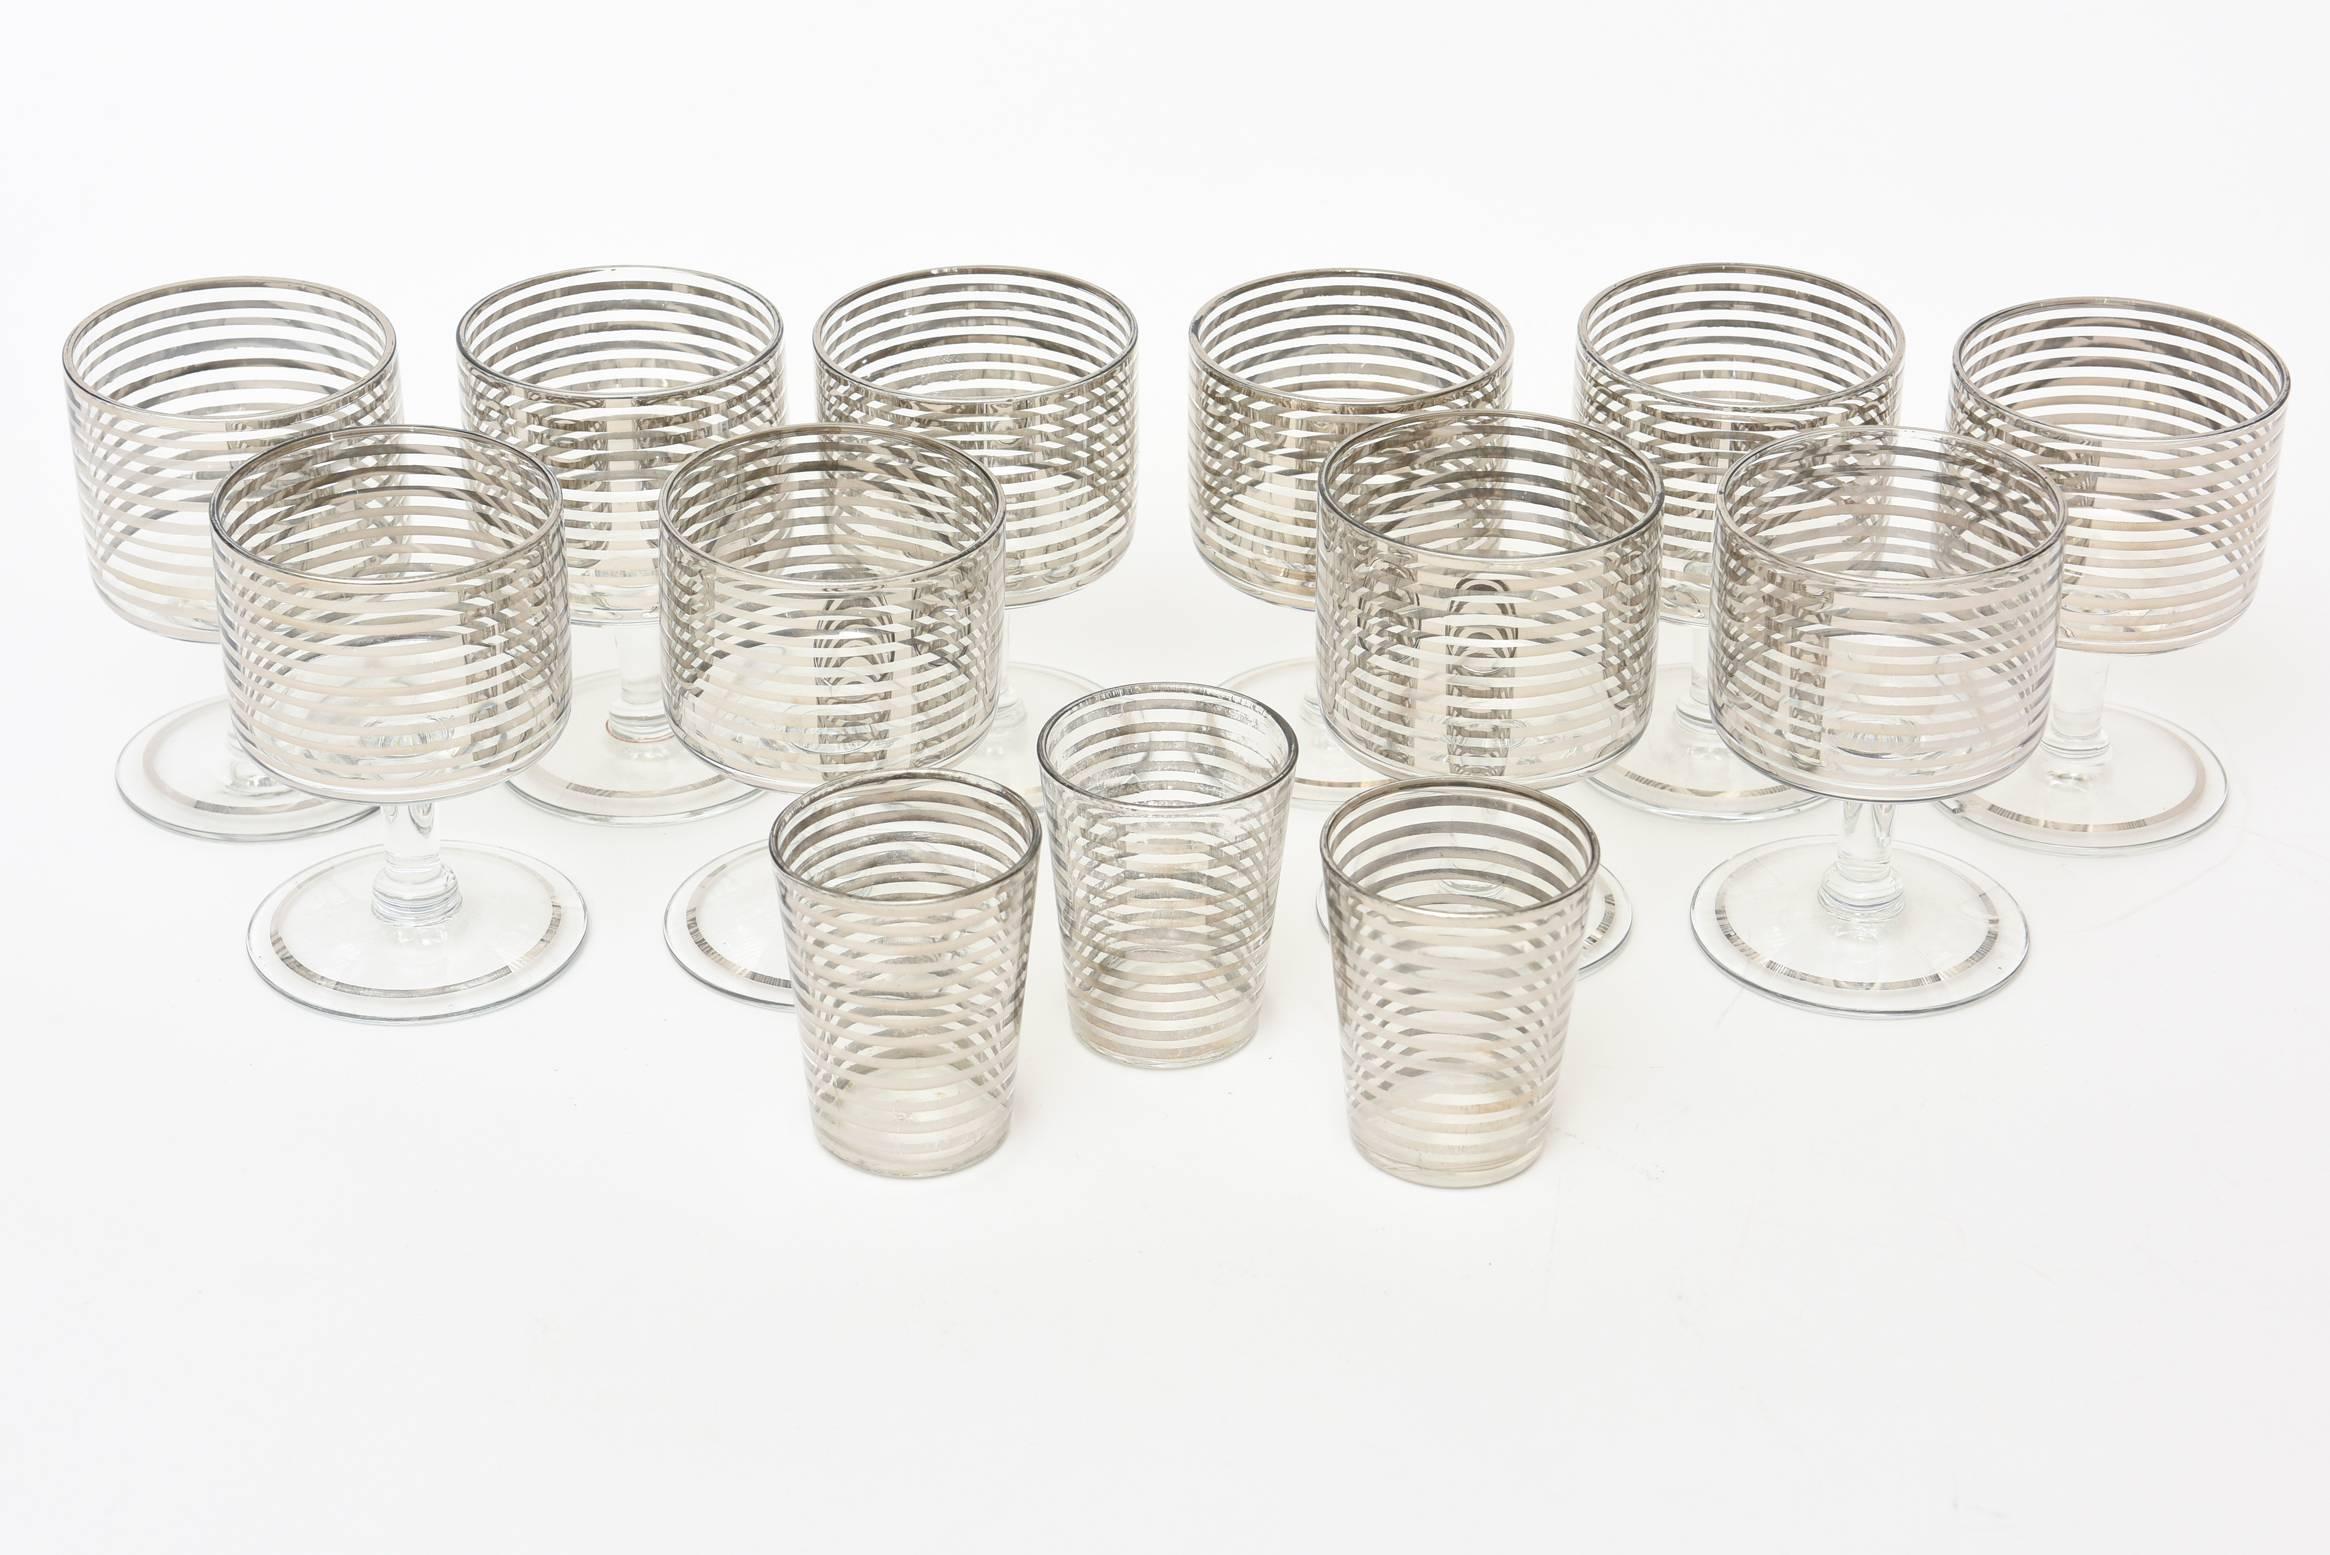 This set of barware is from the 1940s and is silver lined glass. It consists of 10 small cordials with a round glass base with silver line and 3 shot glasses. The concentric silver lines forms a geometric circle. It has an art deco style. The 3 shot